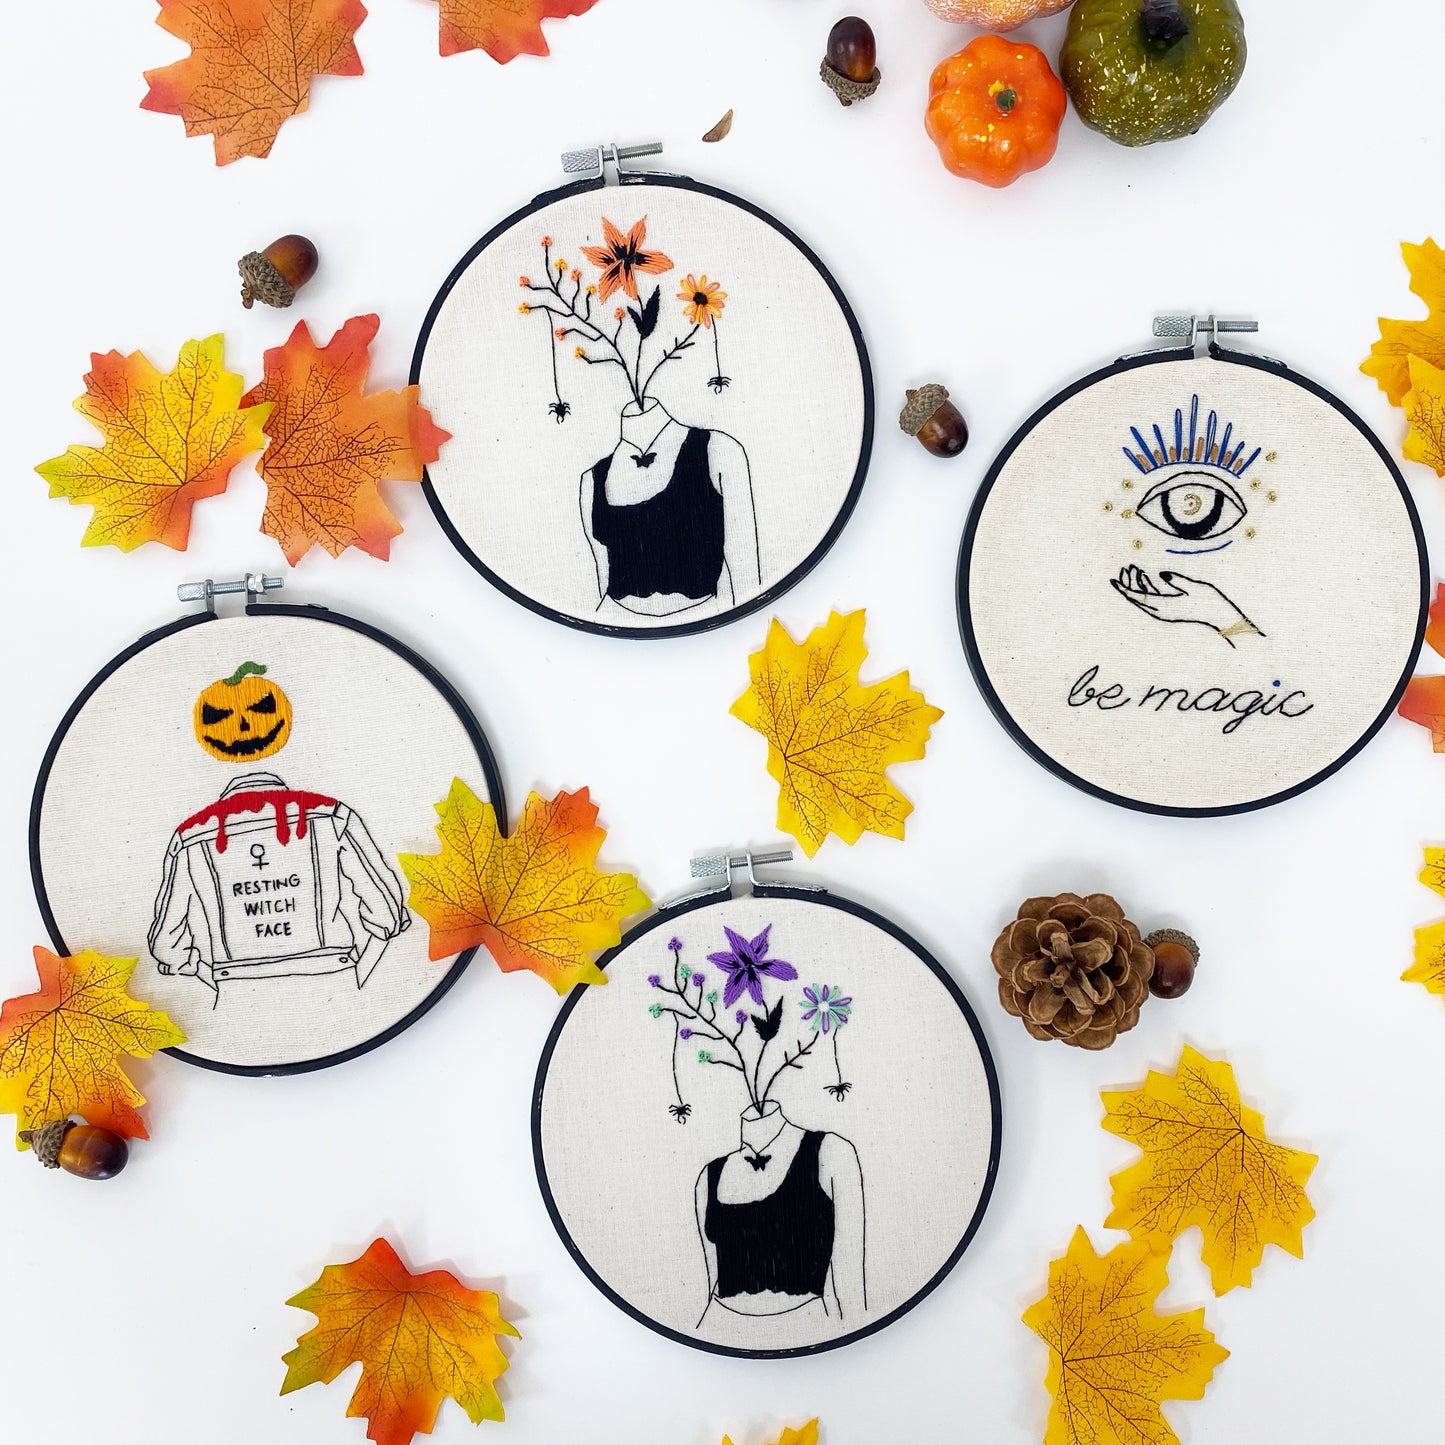 Resting Witch Face - Halloween Embroidery Kit